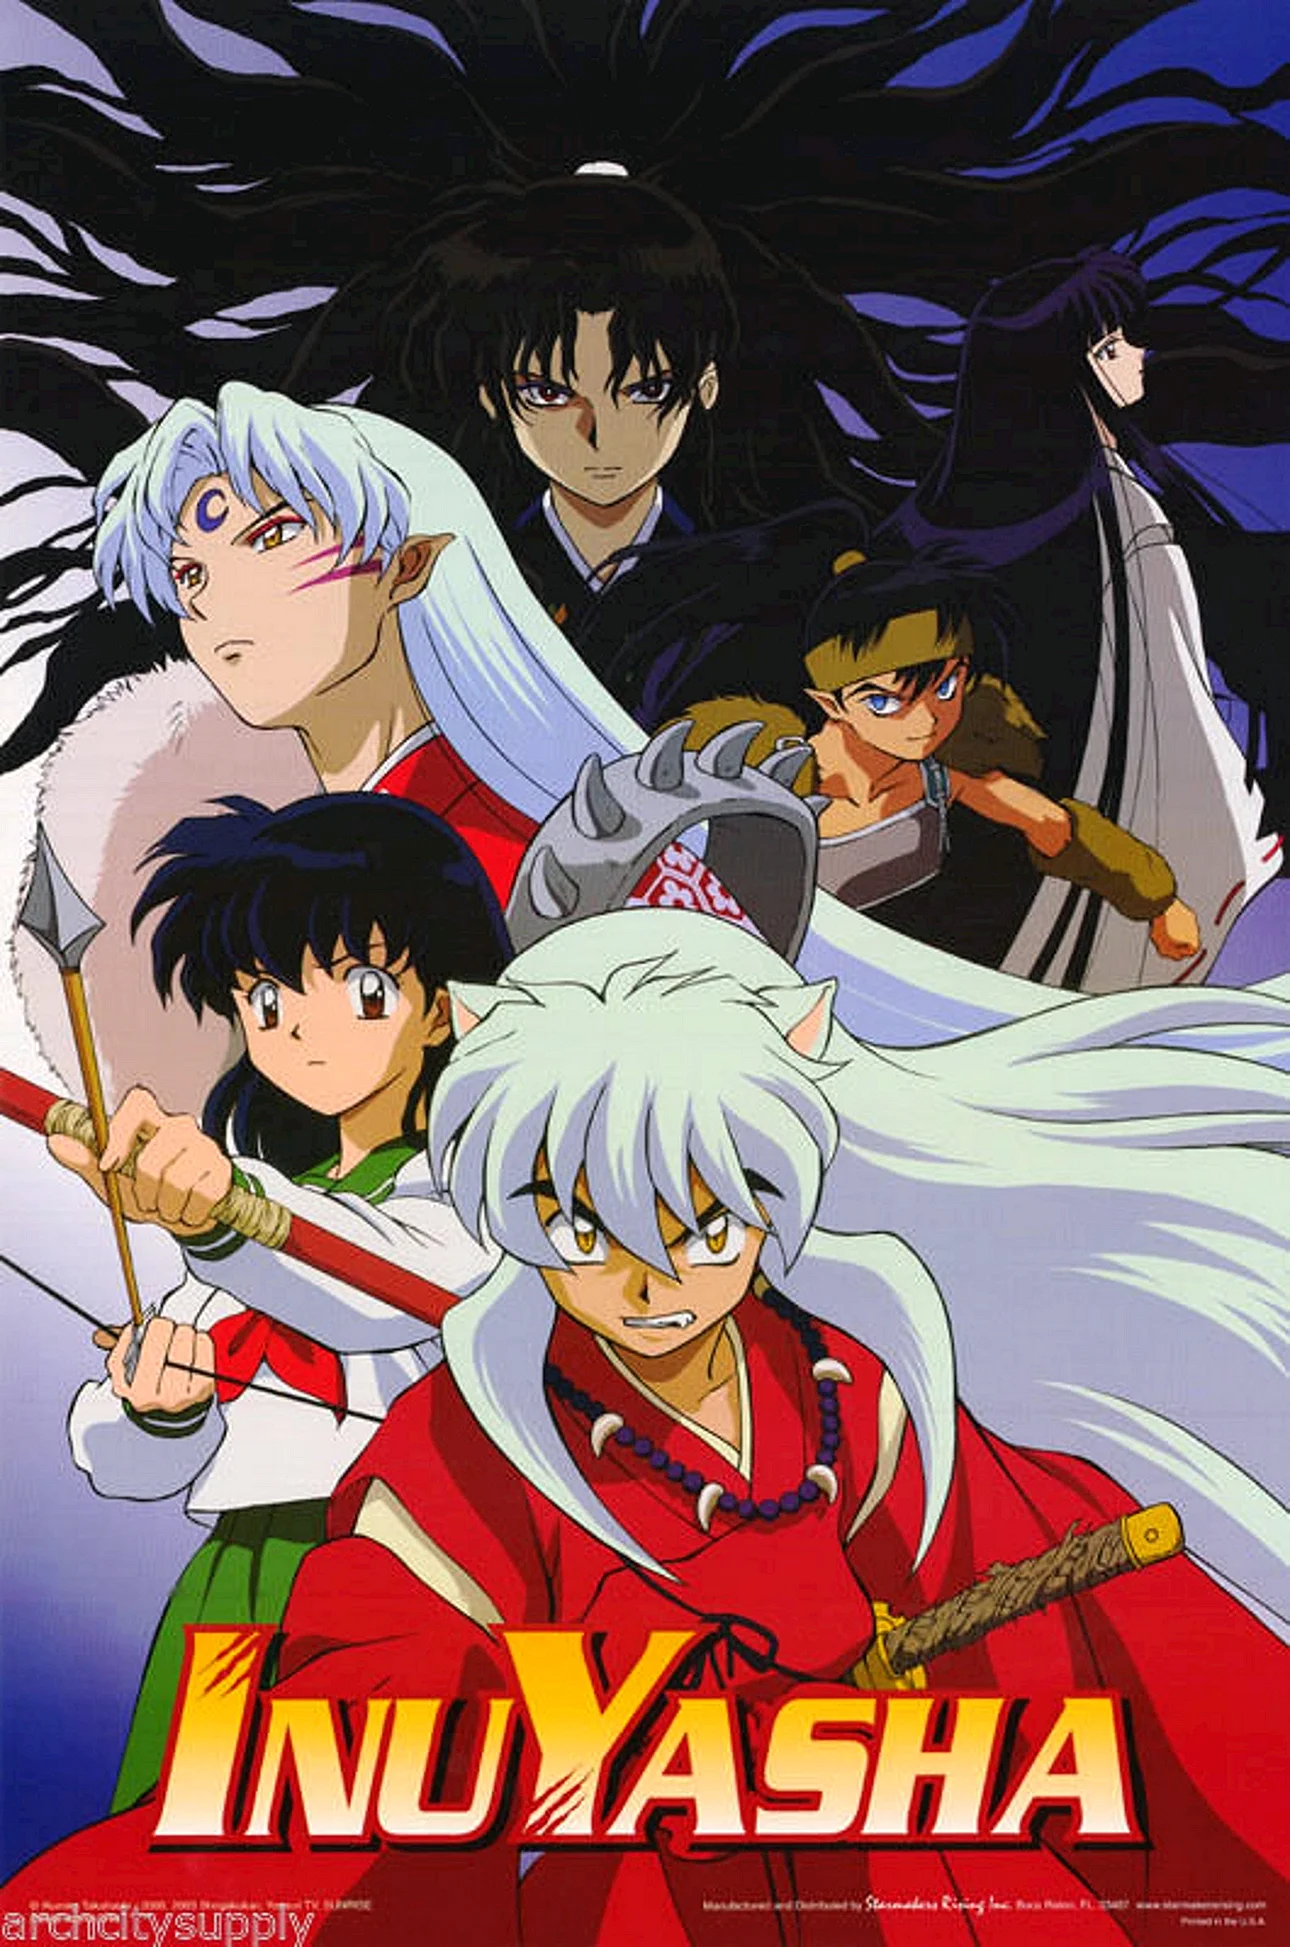 Inuyasha Poster Wallpaper For iPhone